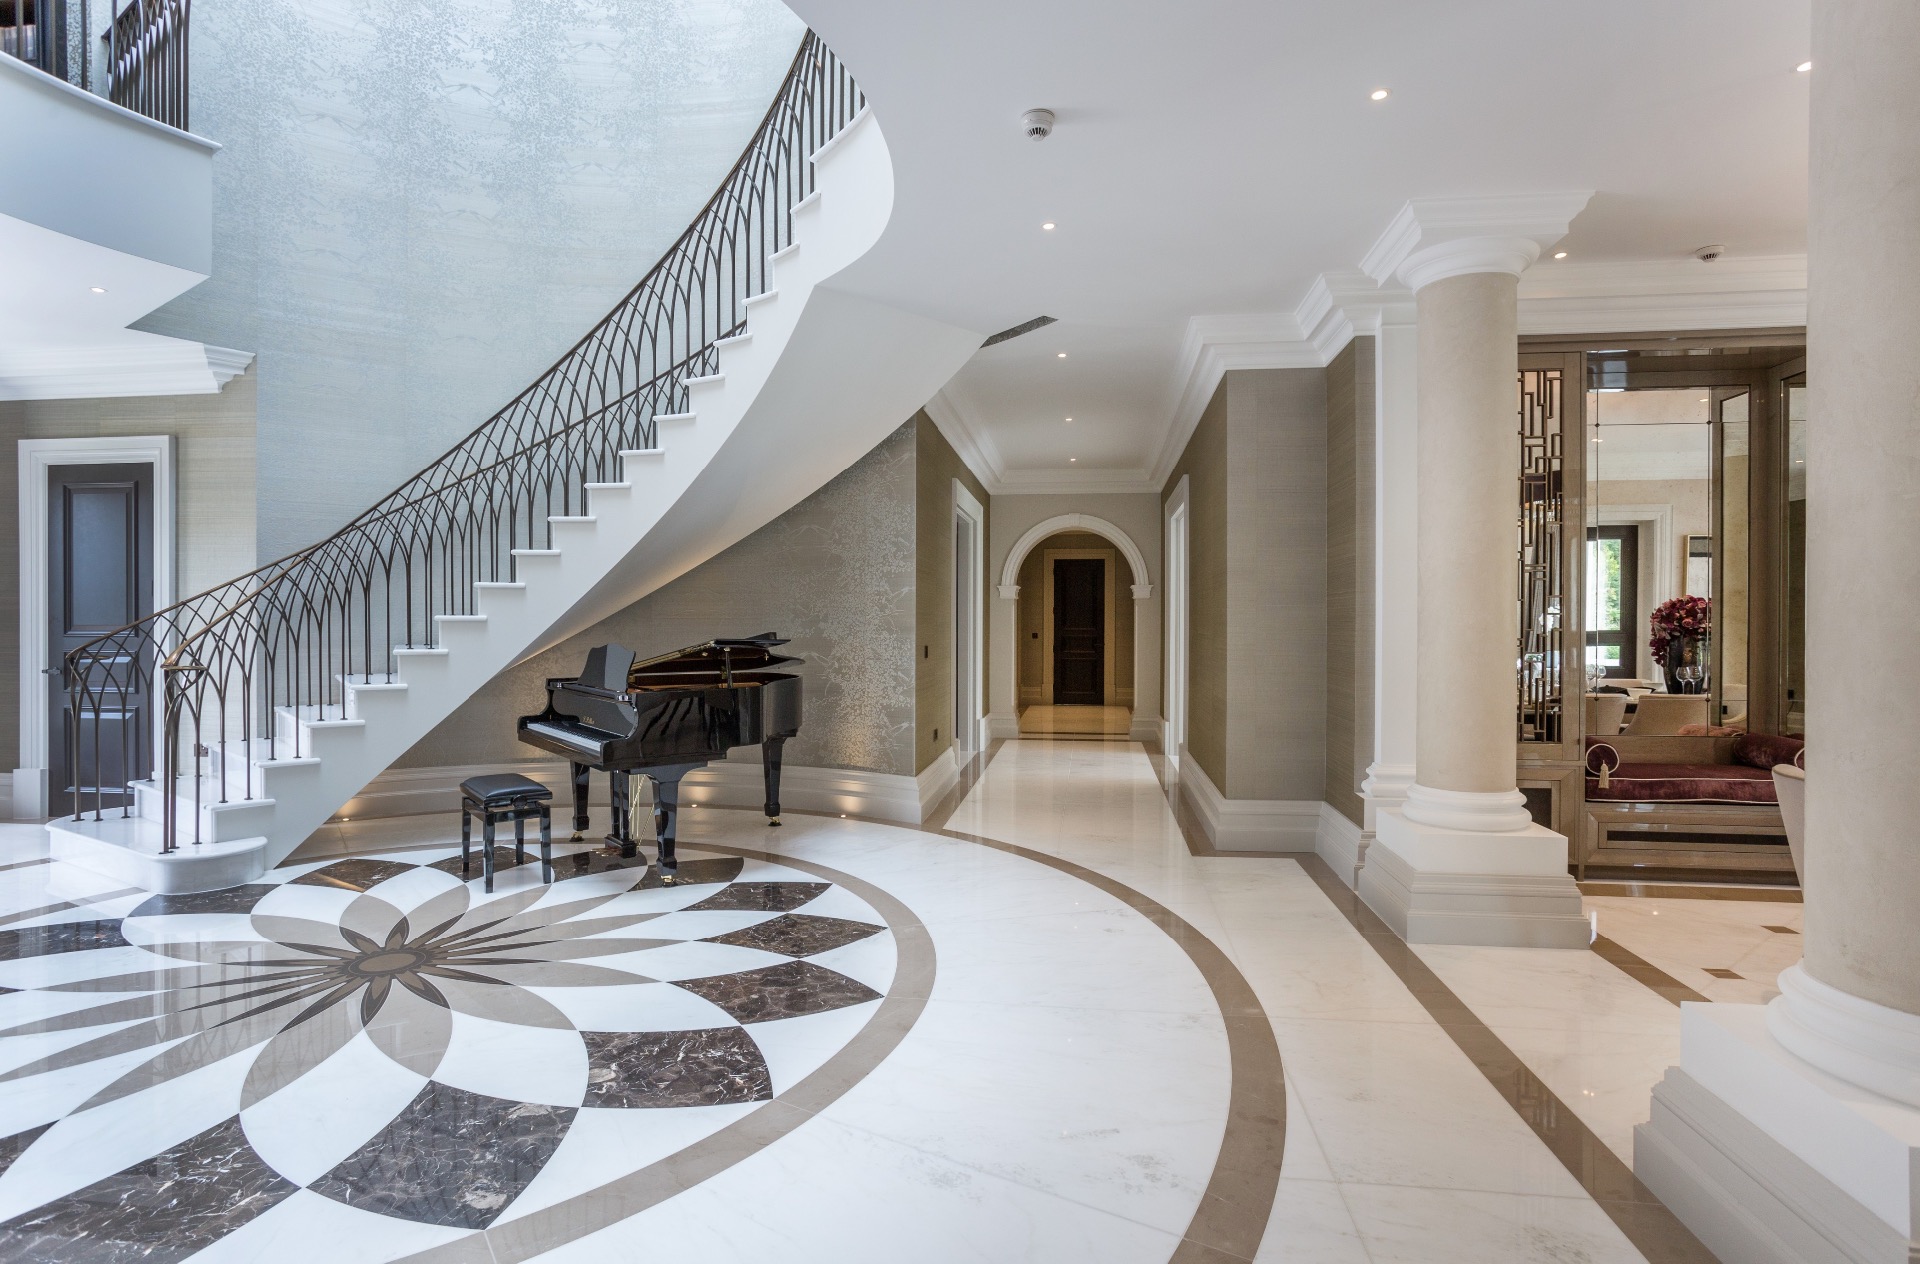 Kings Chase, Oxshott - Curved Precast Concrete Luxury Staircase